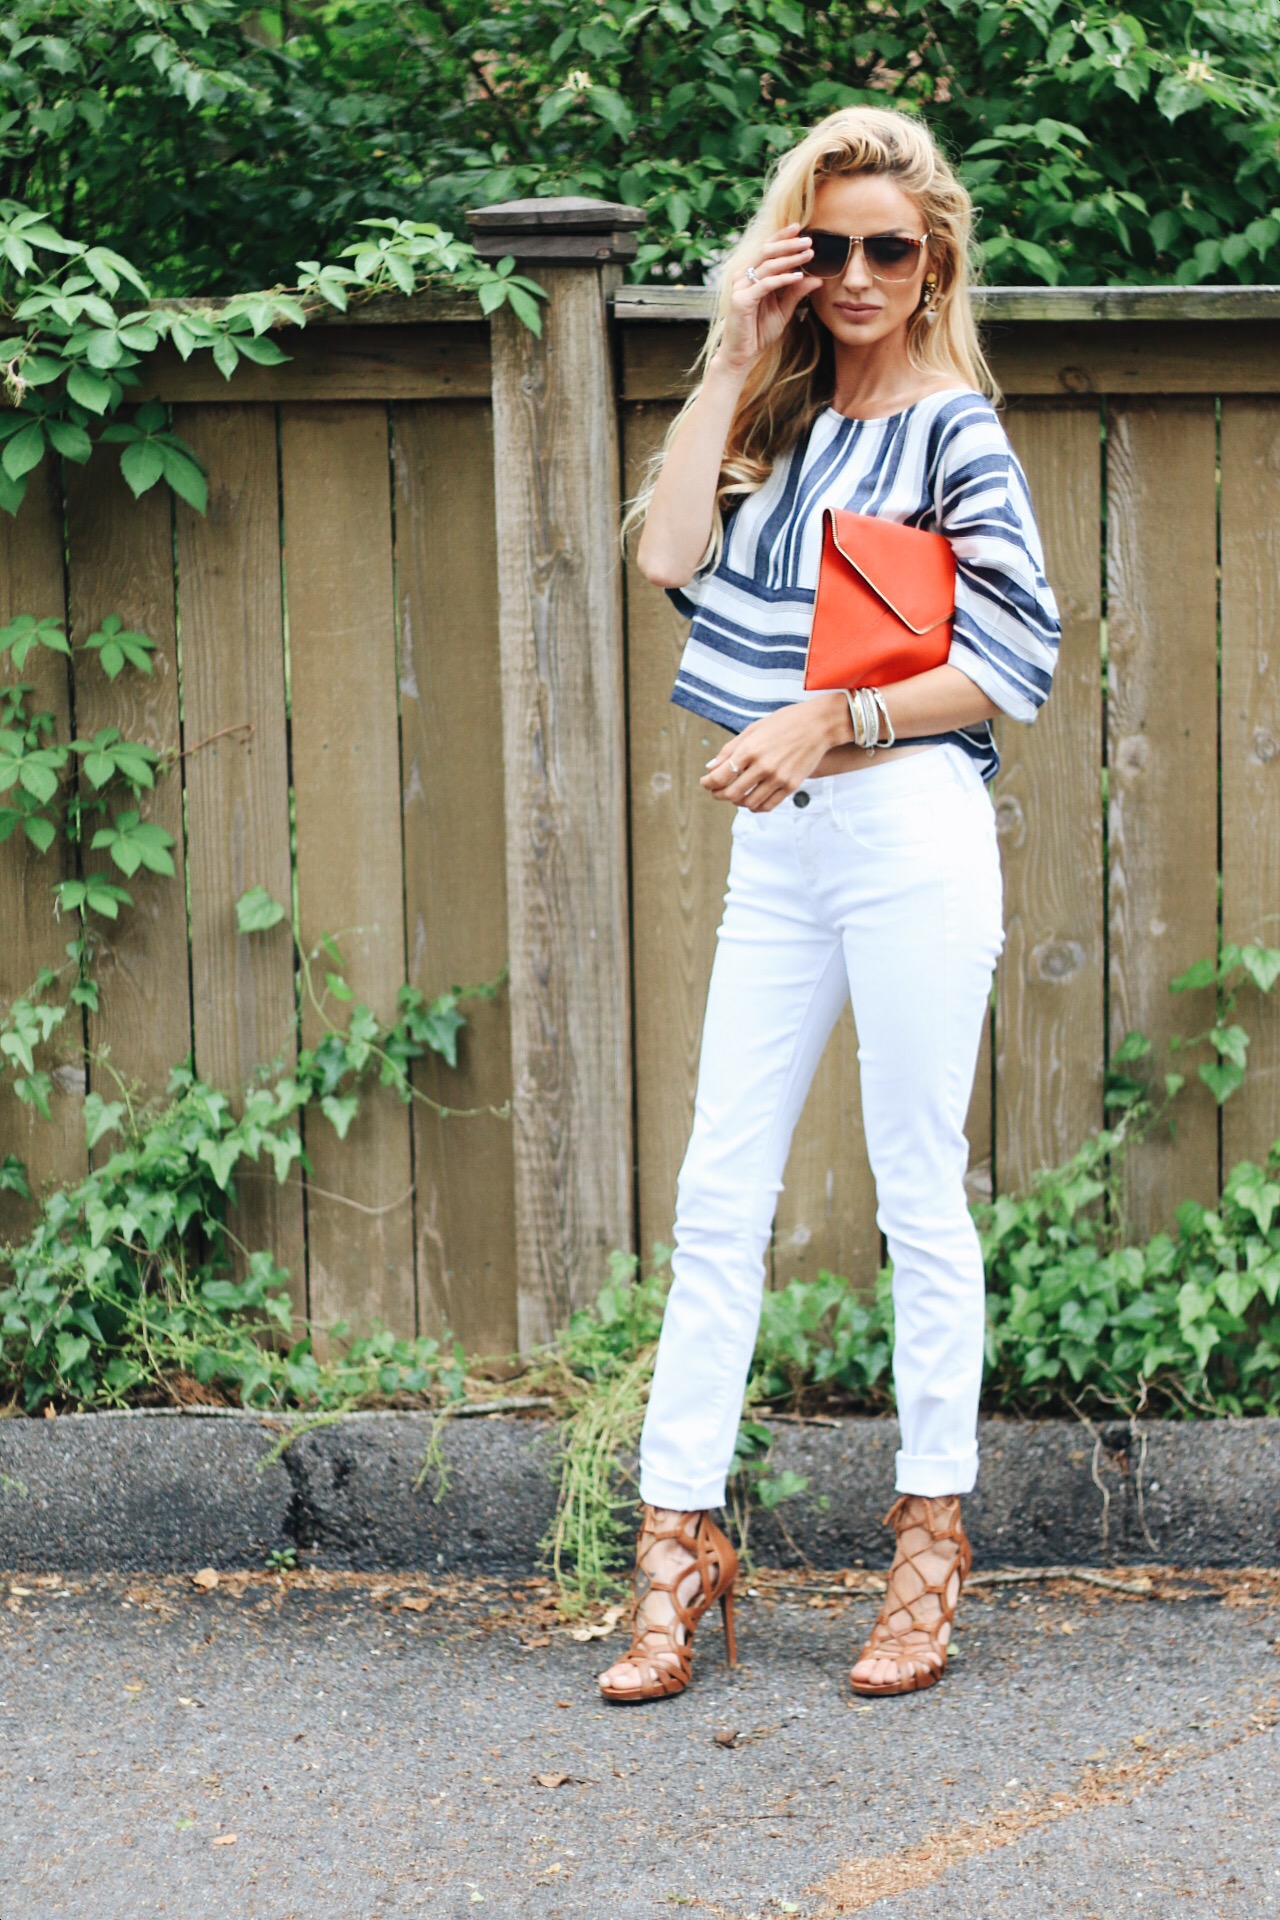 Crop Top and Crisp Whites - Airelle Snyder